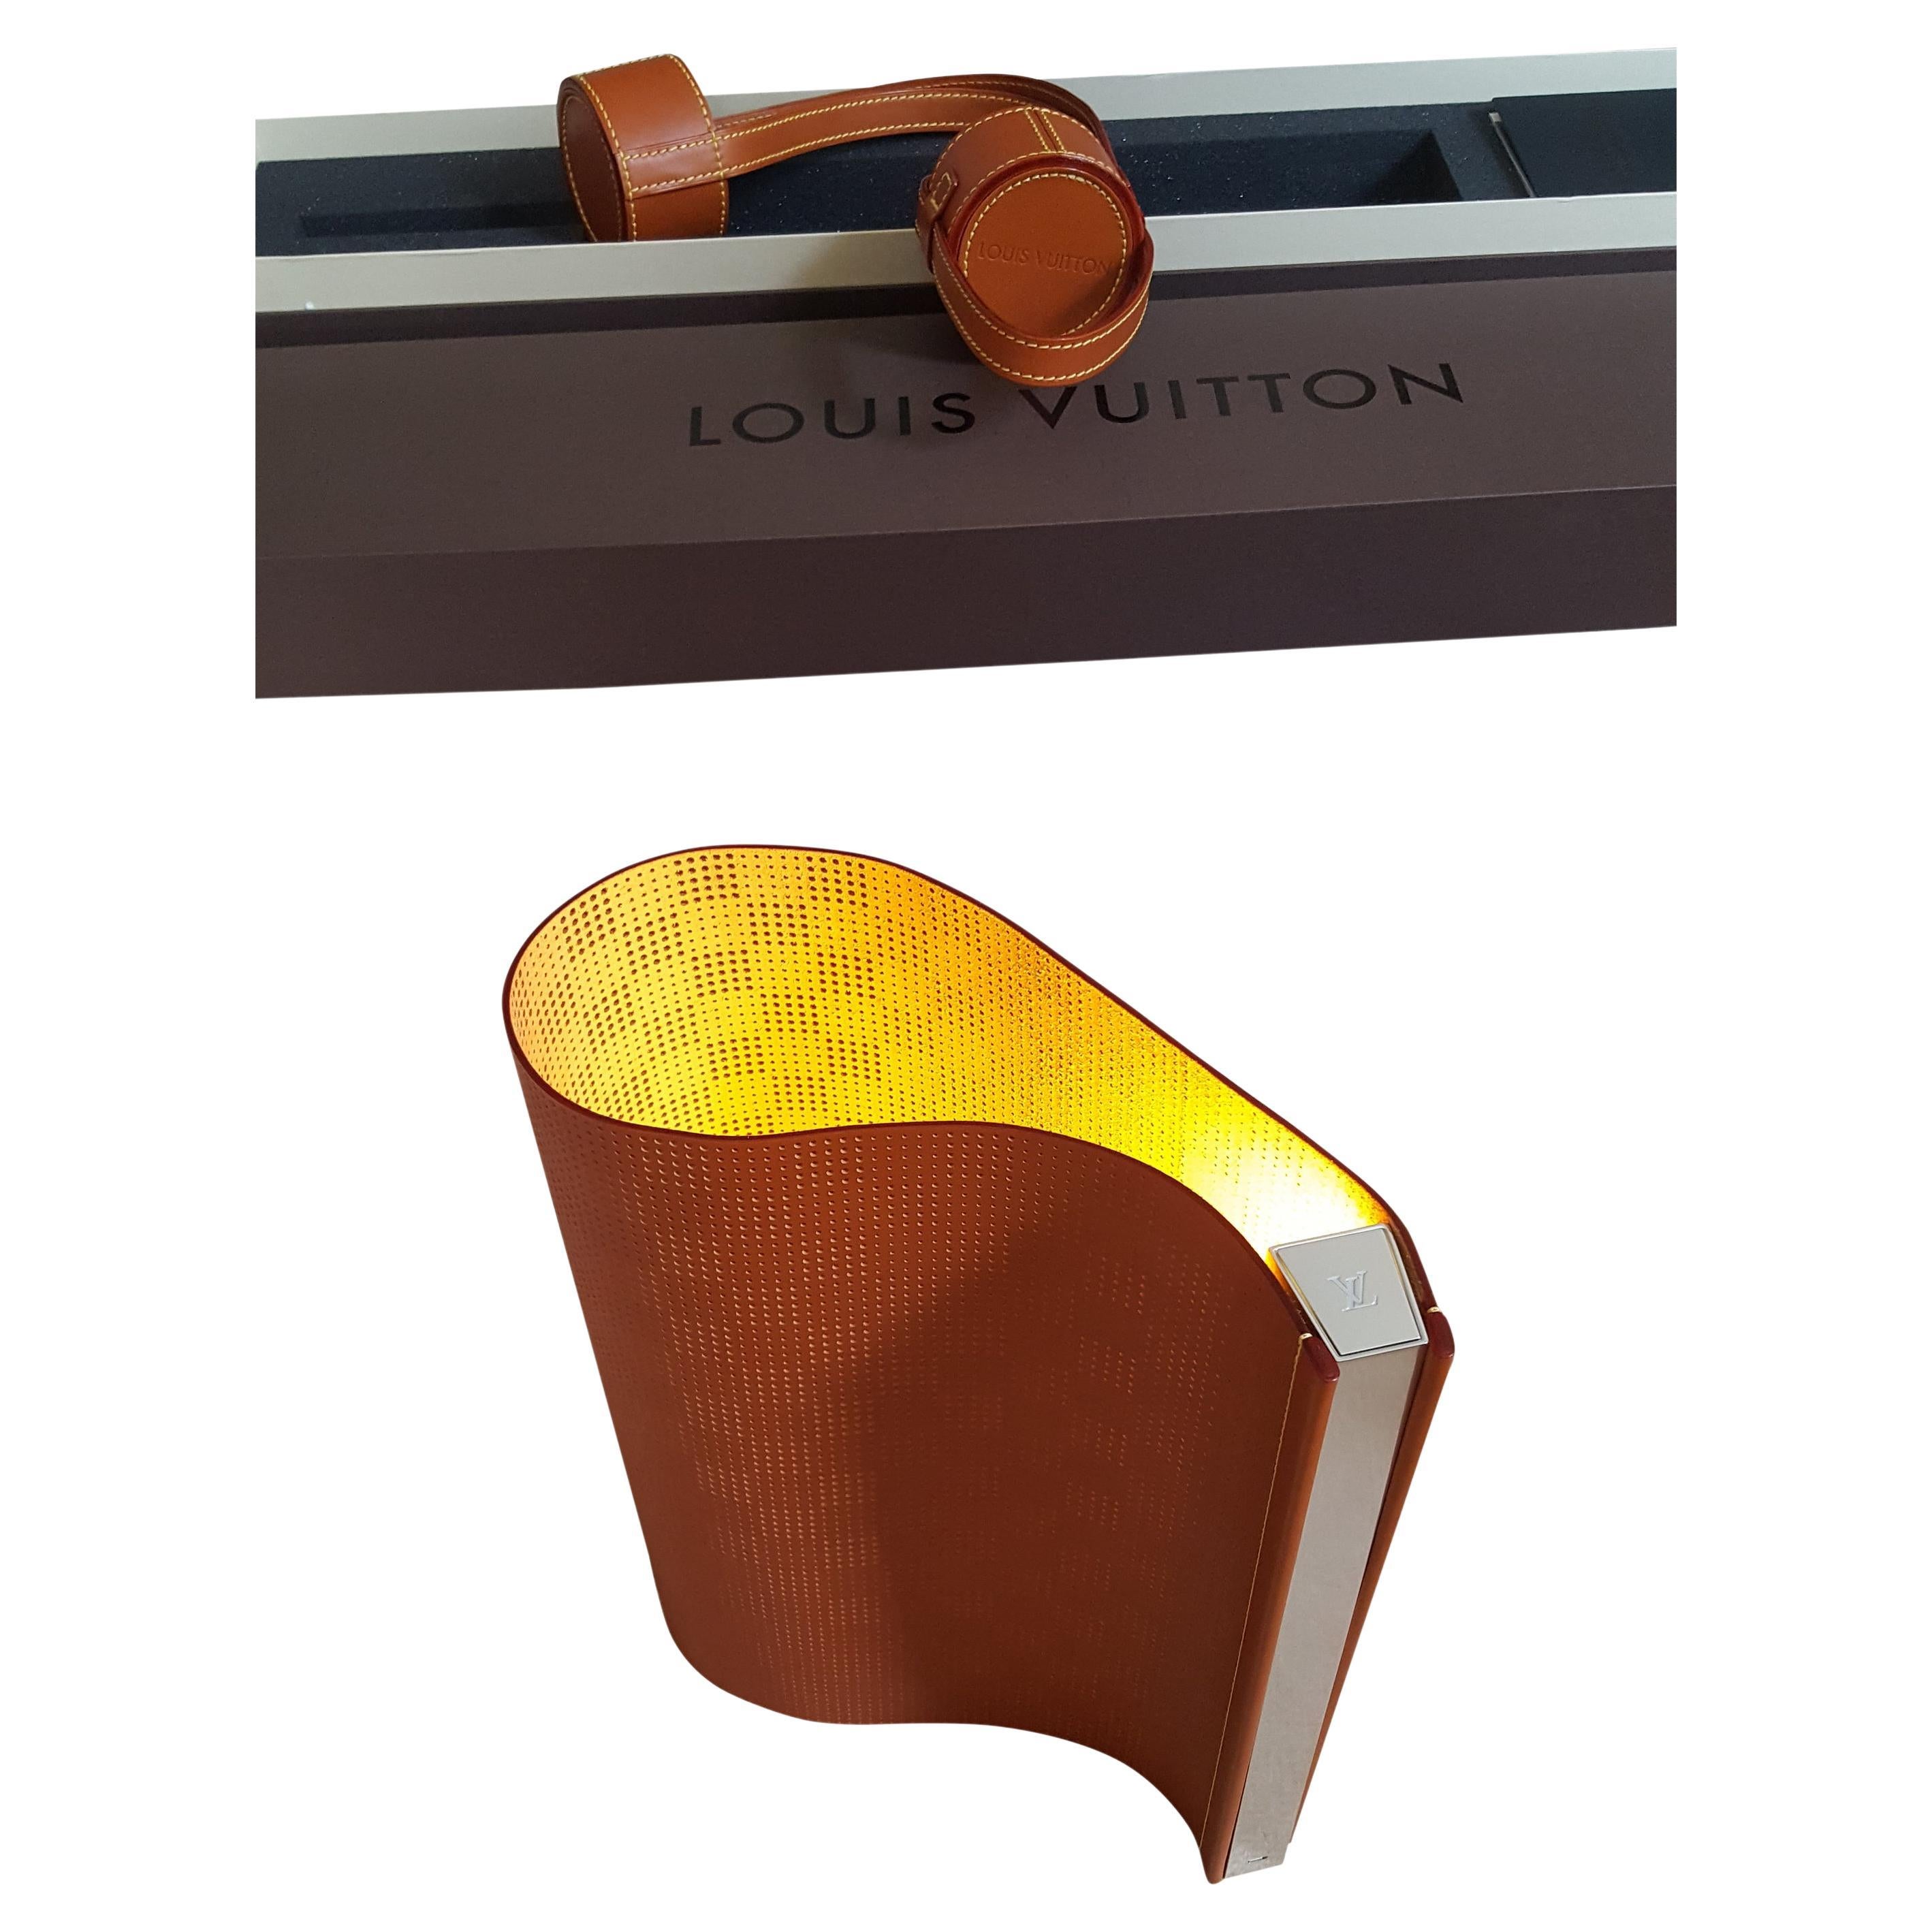 Louis Vuitton Surface Table Lamp 'Limited Edition by Nendo, Objets Nomades' For Sale